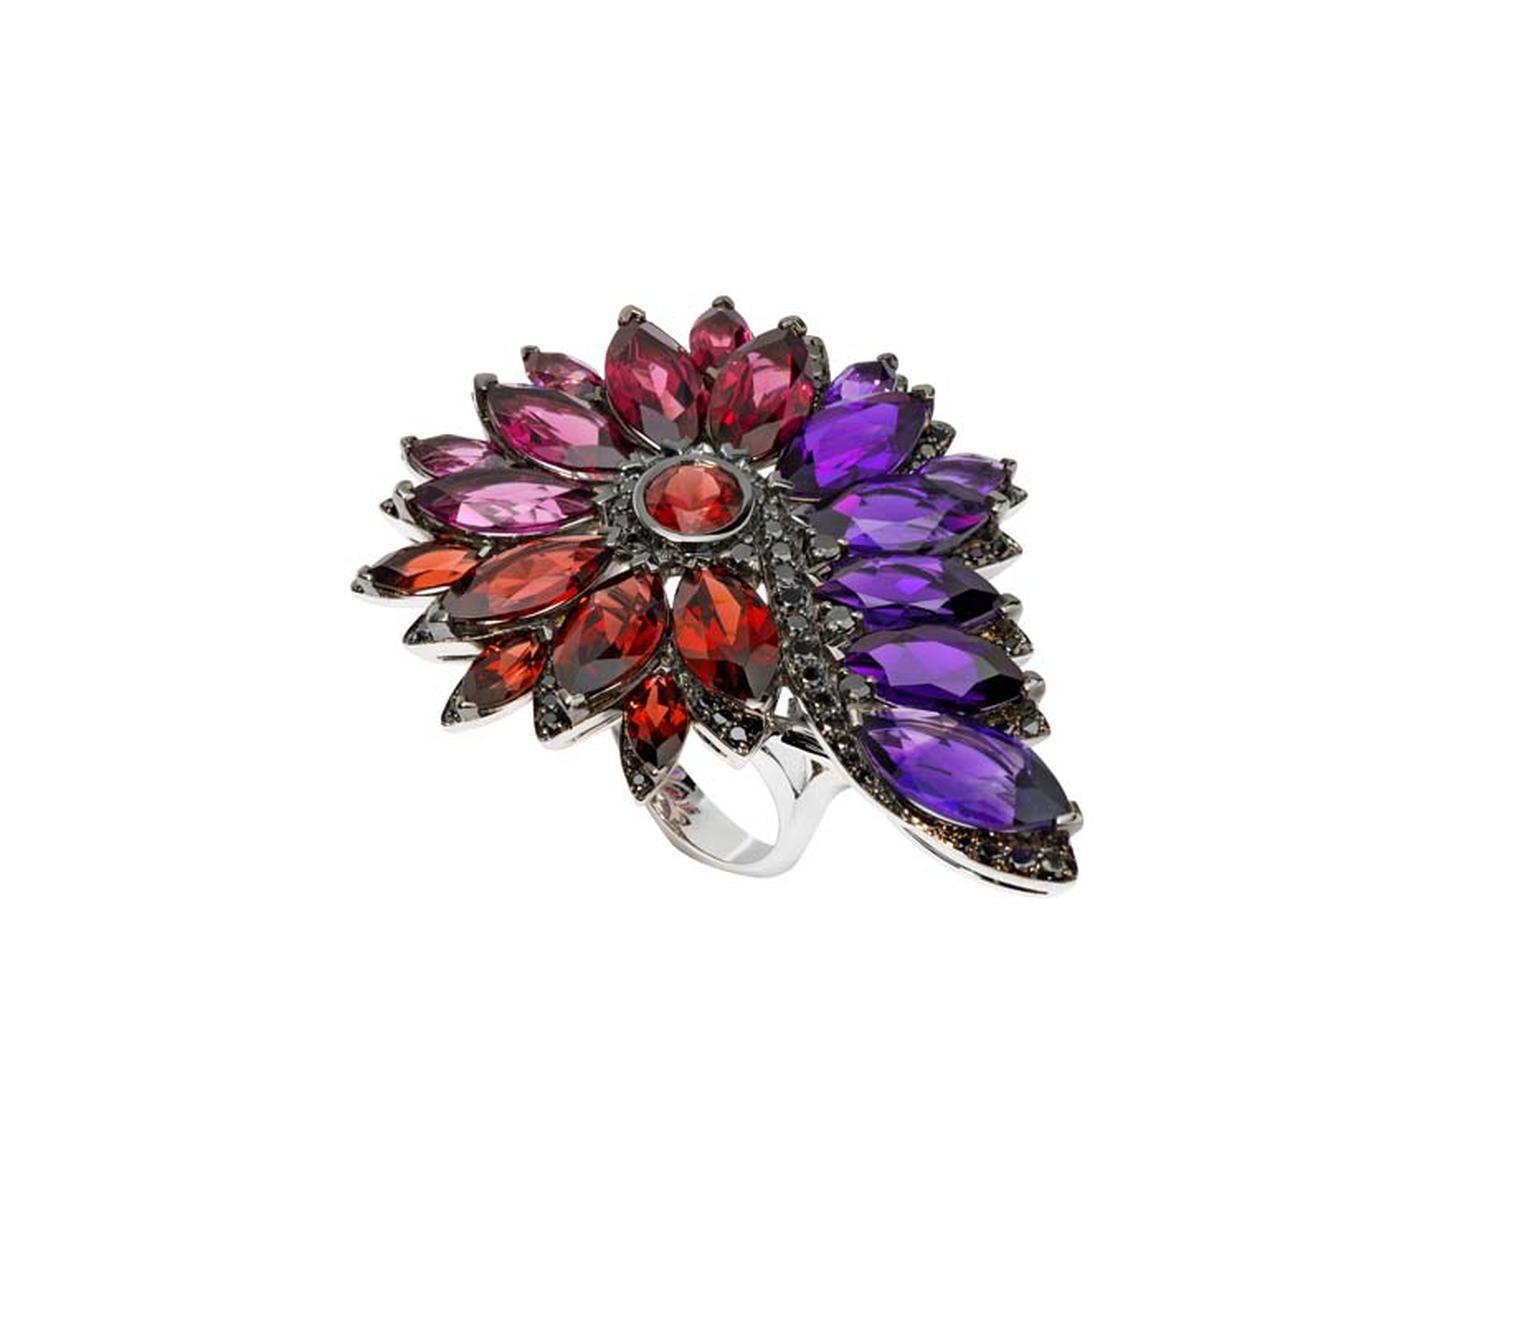 Stephen Webster Albion Rose Magnipheasant ring with amethyst, garnet, pink tourmalines and pavé black diamonds